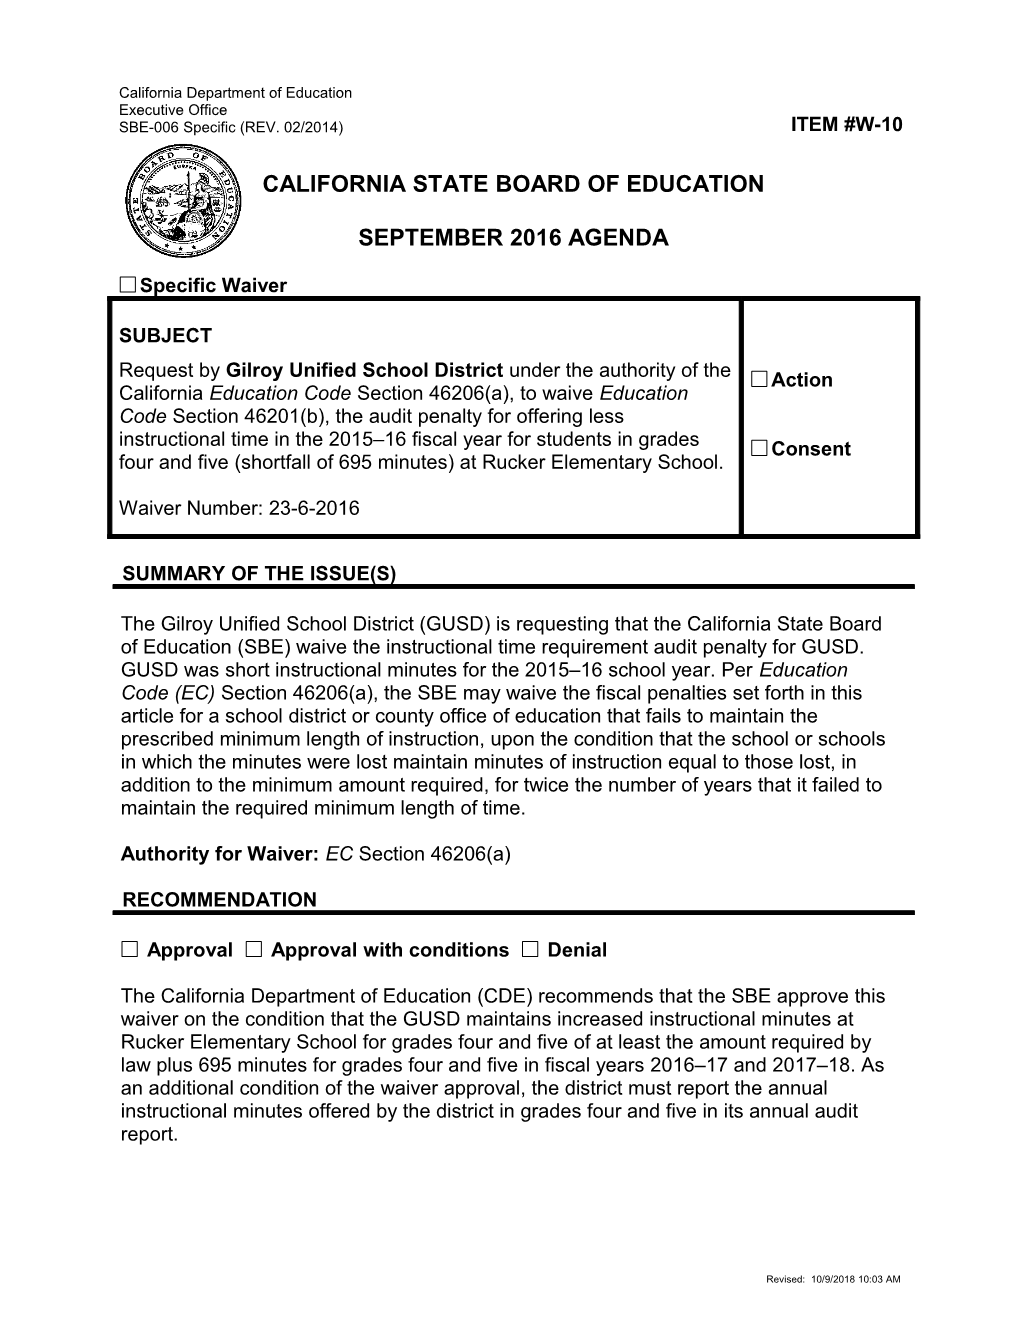 September 2016 Waiver Item W-10 - Meeting Agendas (CA State Board of Education)